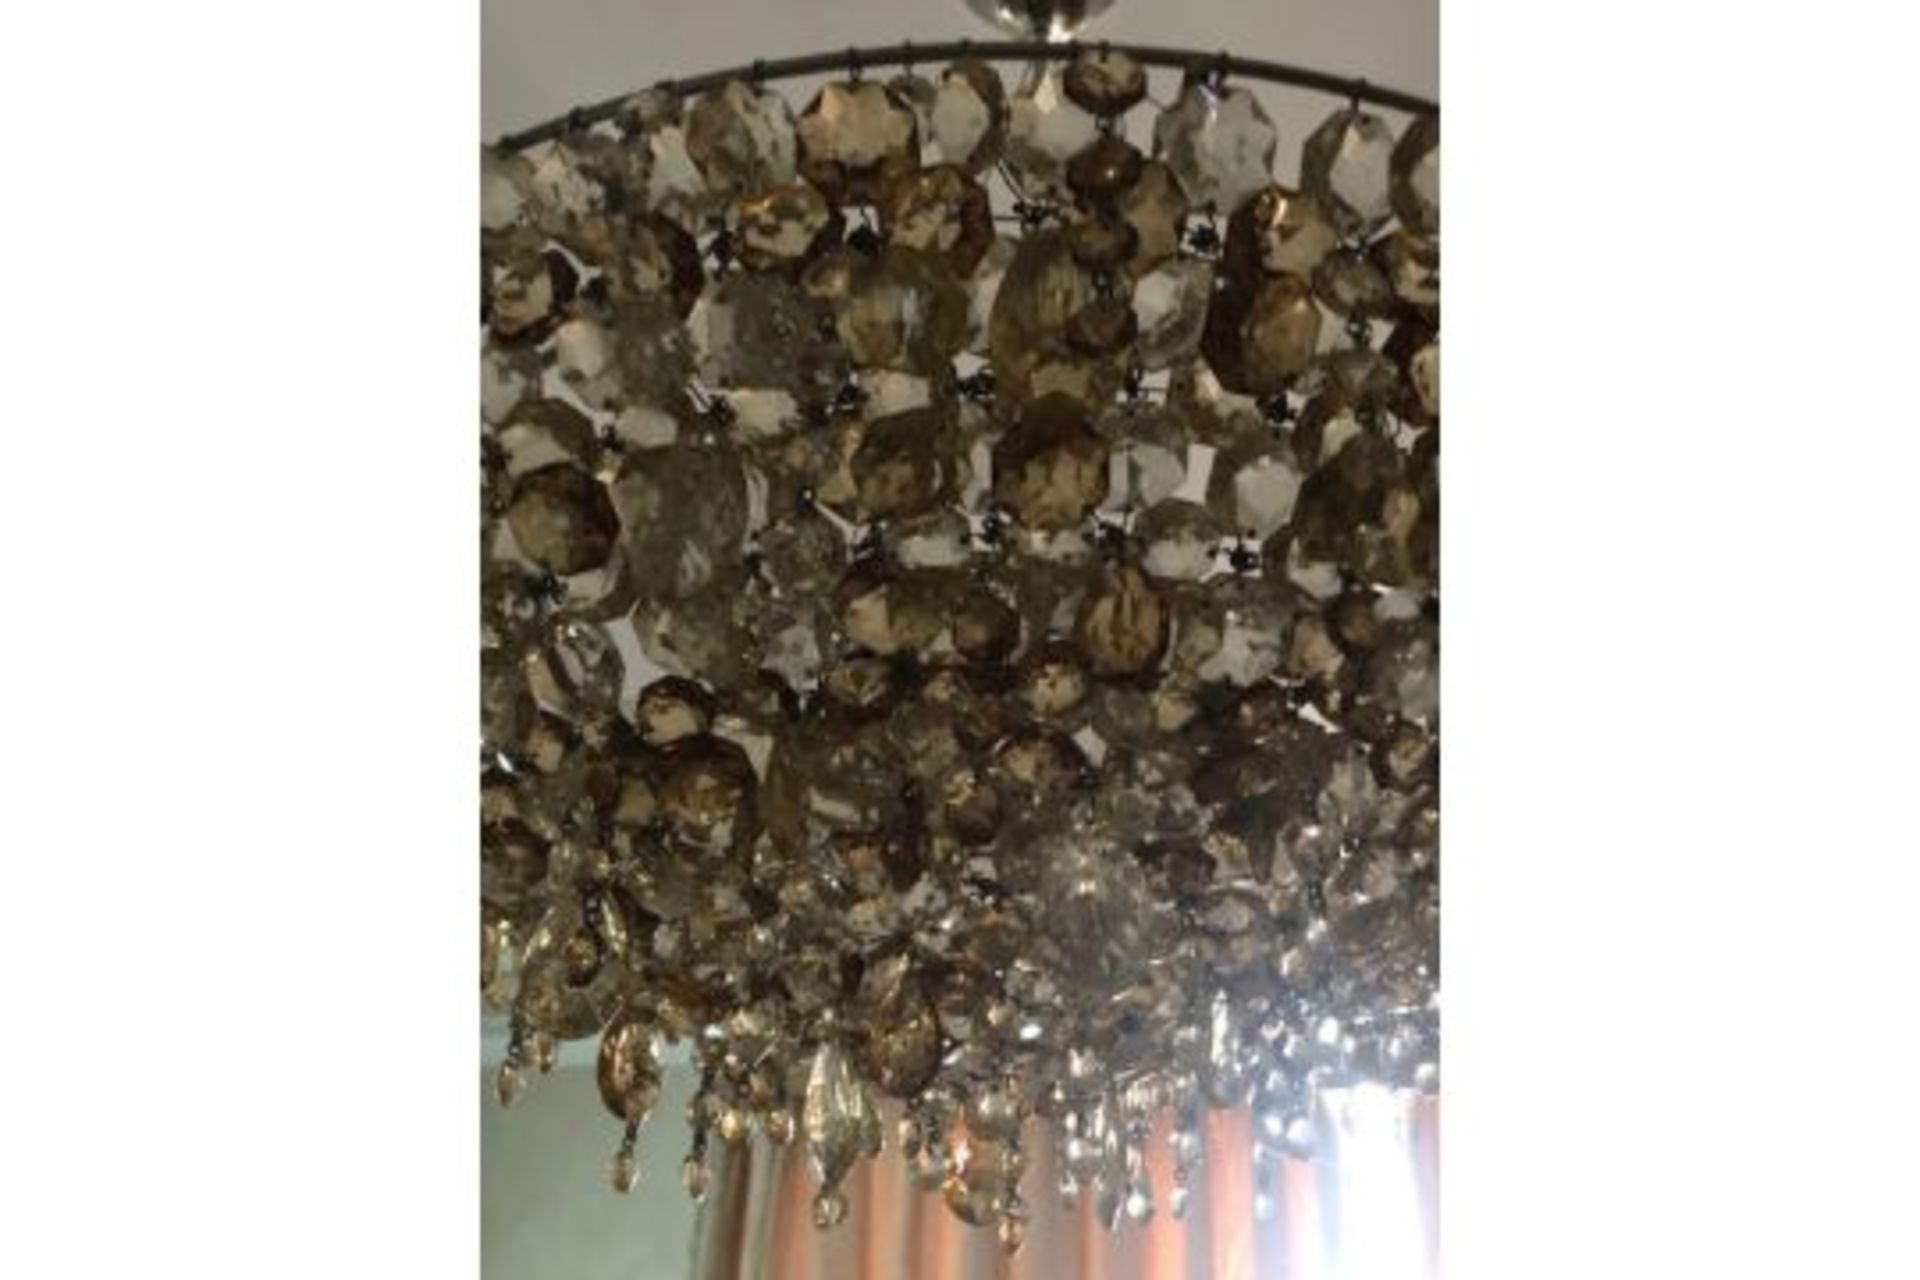 Lolli E Memmoli Ugolino Chandelier Crystals Woven Together Like Fabric, Hung From A Two- - Bild 2 aus 2